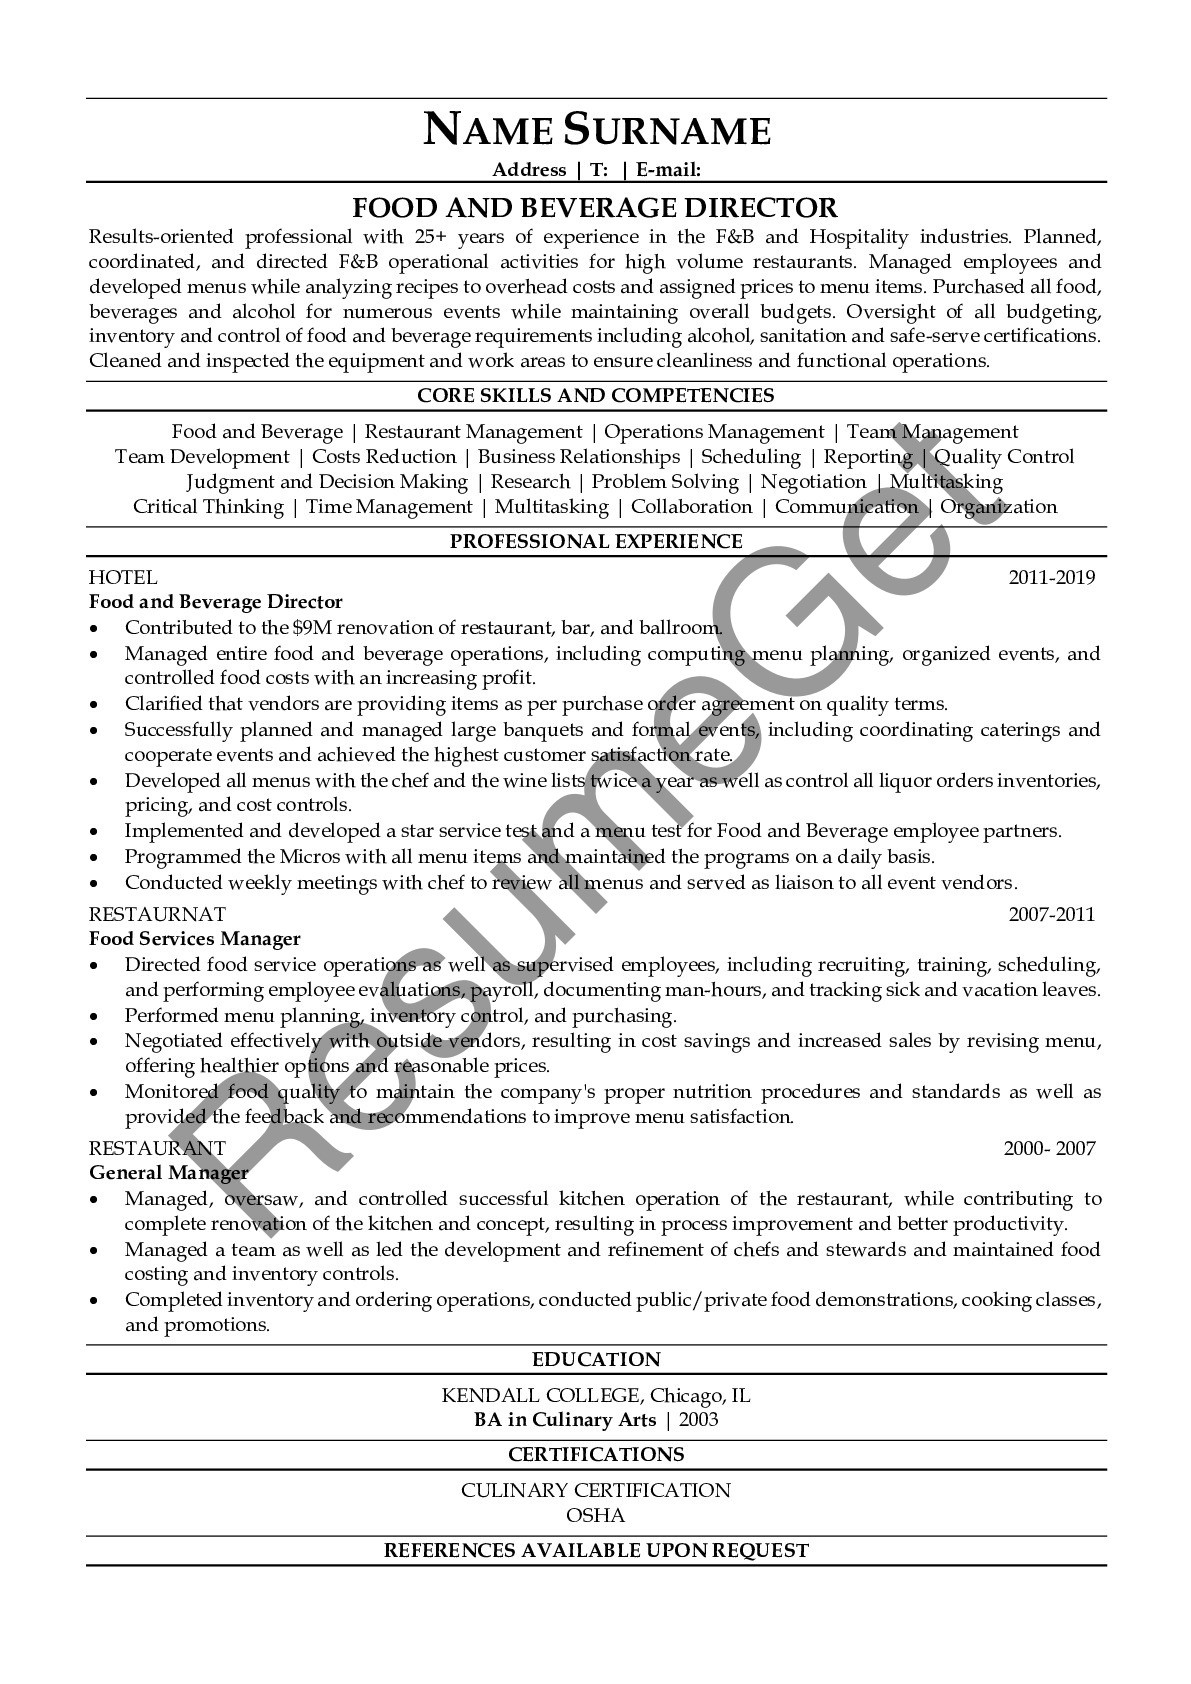 Food and Beverage Manager Resume Template Food and Beverage Director Resume Examples Resumegets.com